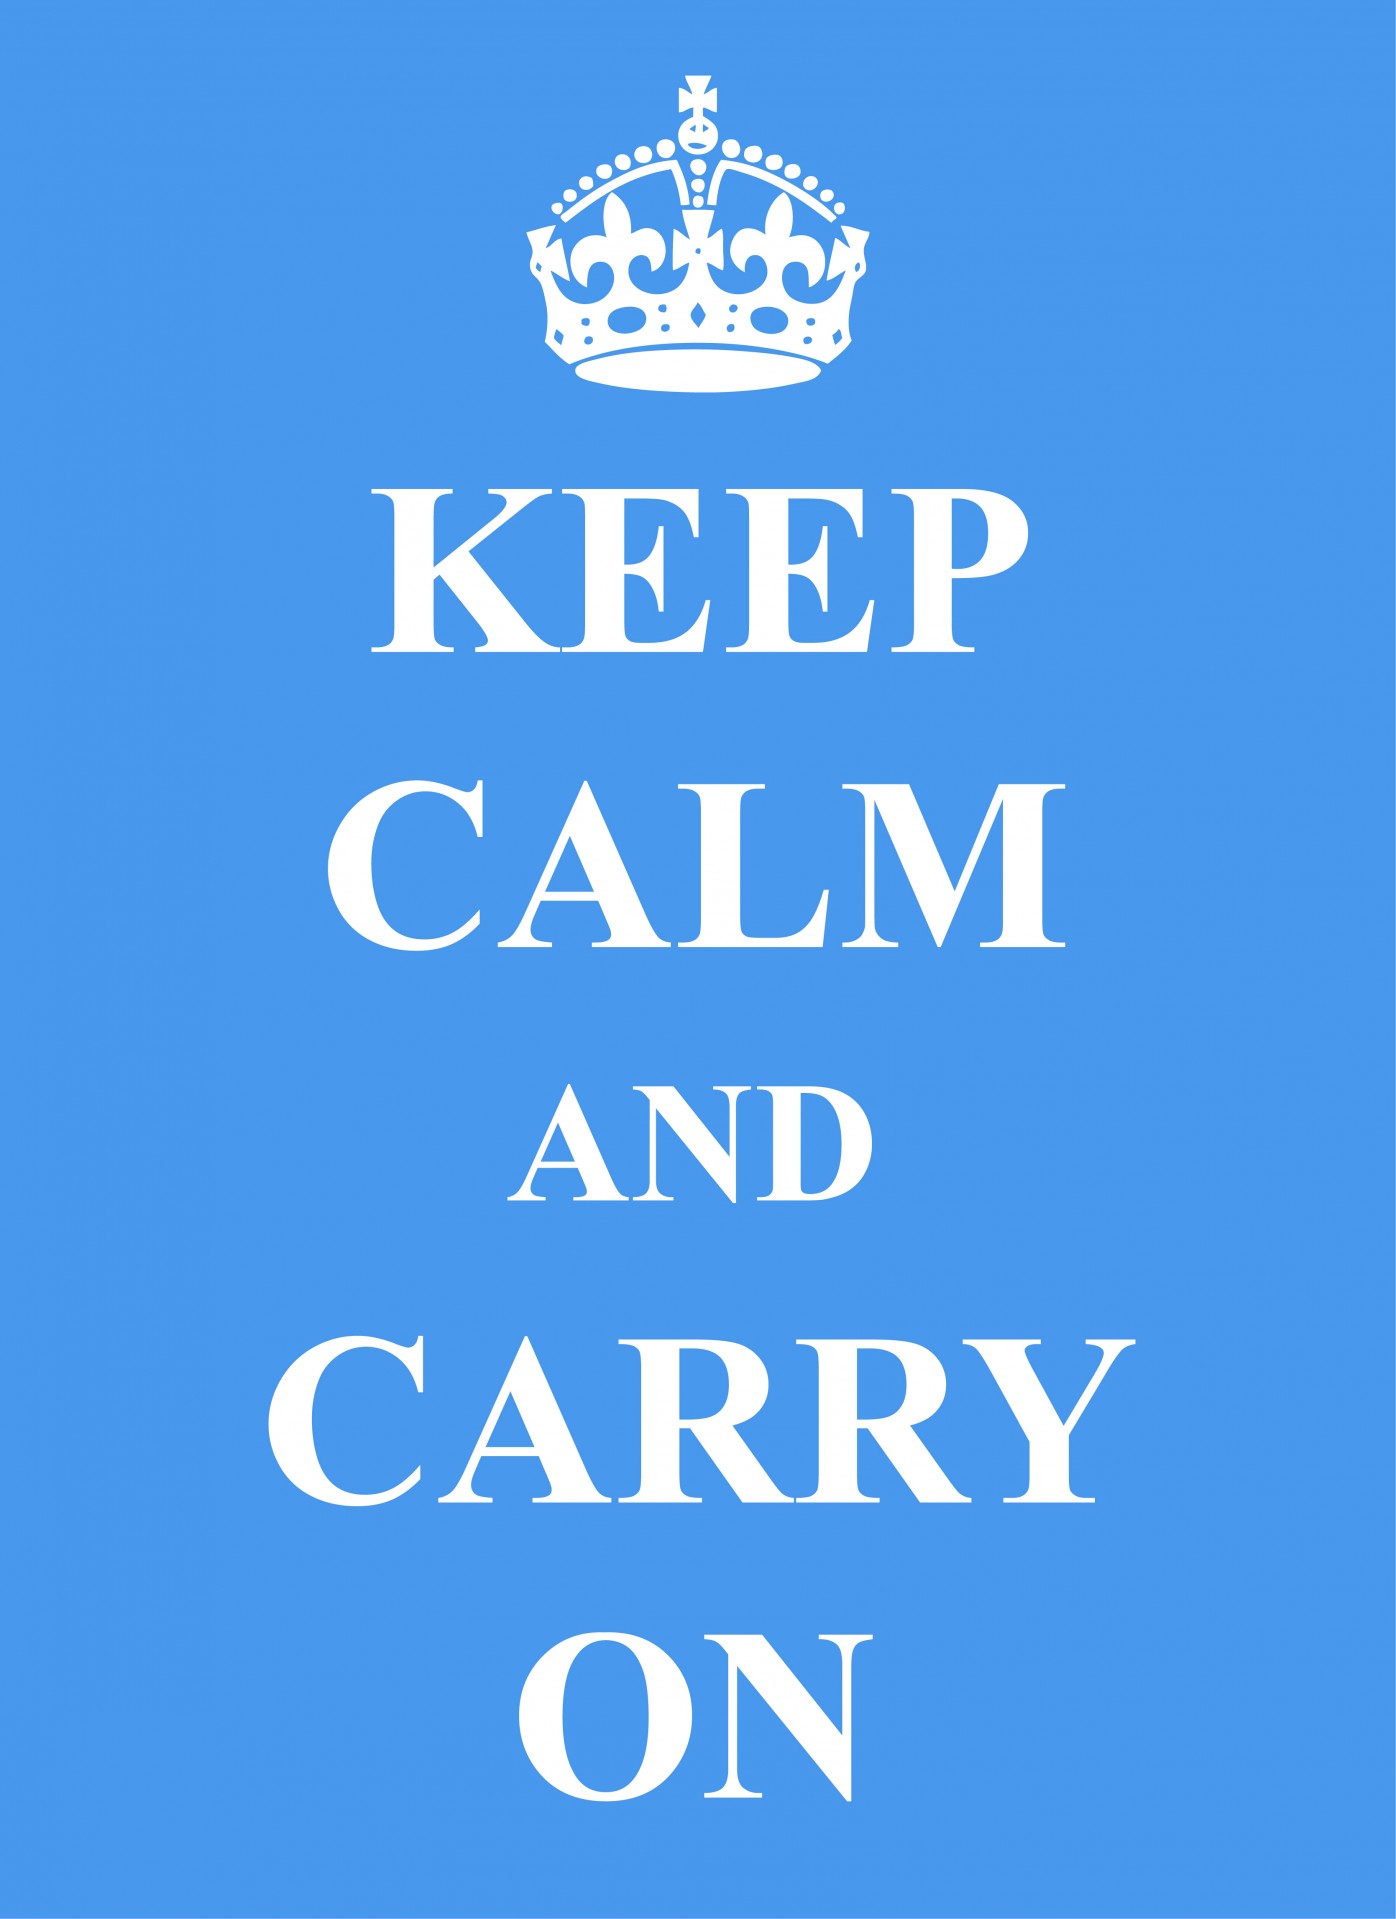 keep calm and carry on blue poster free photo